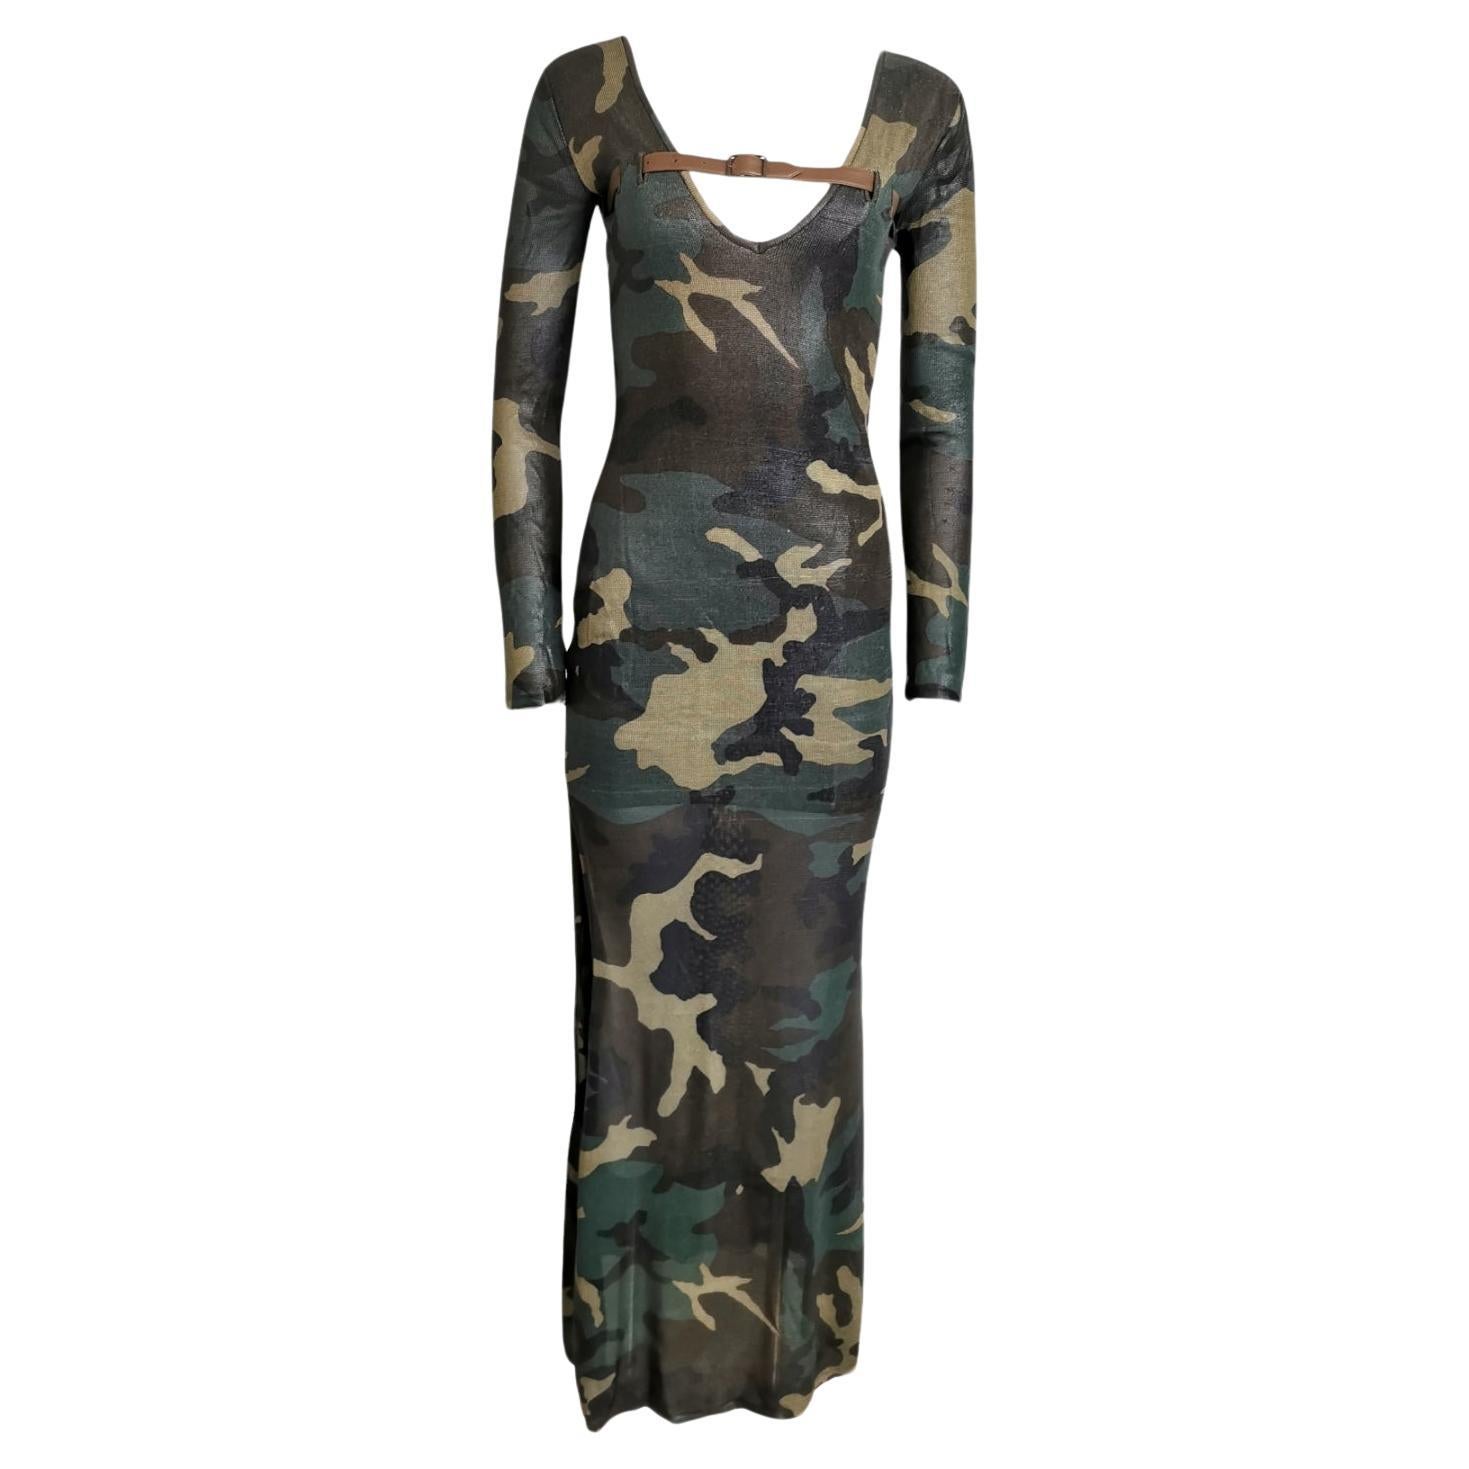 Dior camouflage maxi dress, SS 2001